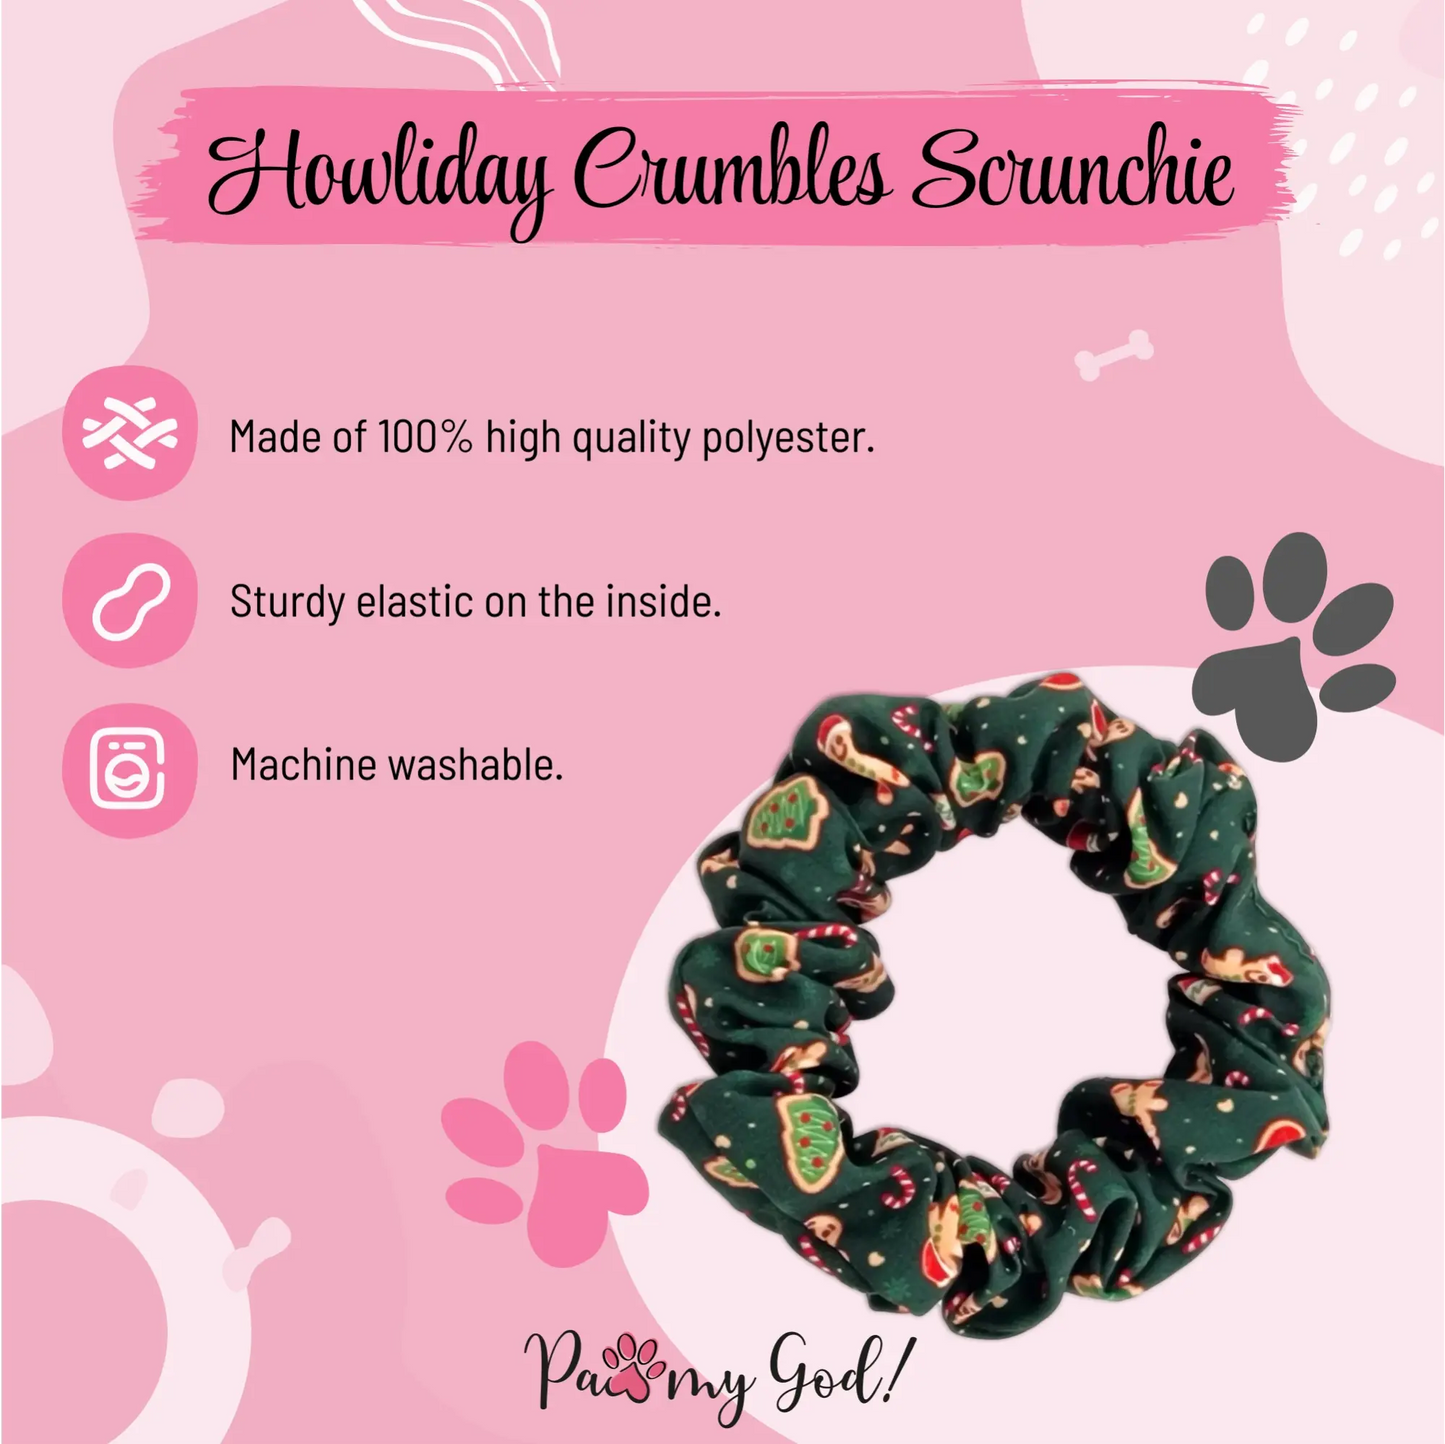 Howliday Crumbles Scrunchie Features